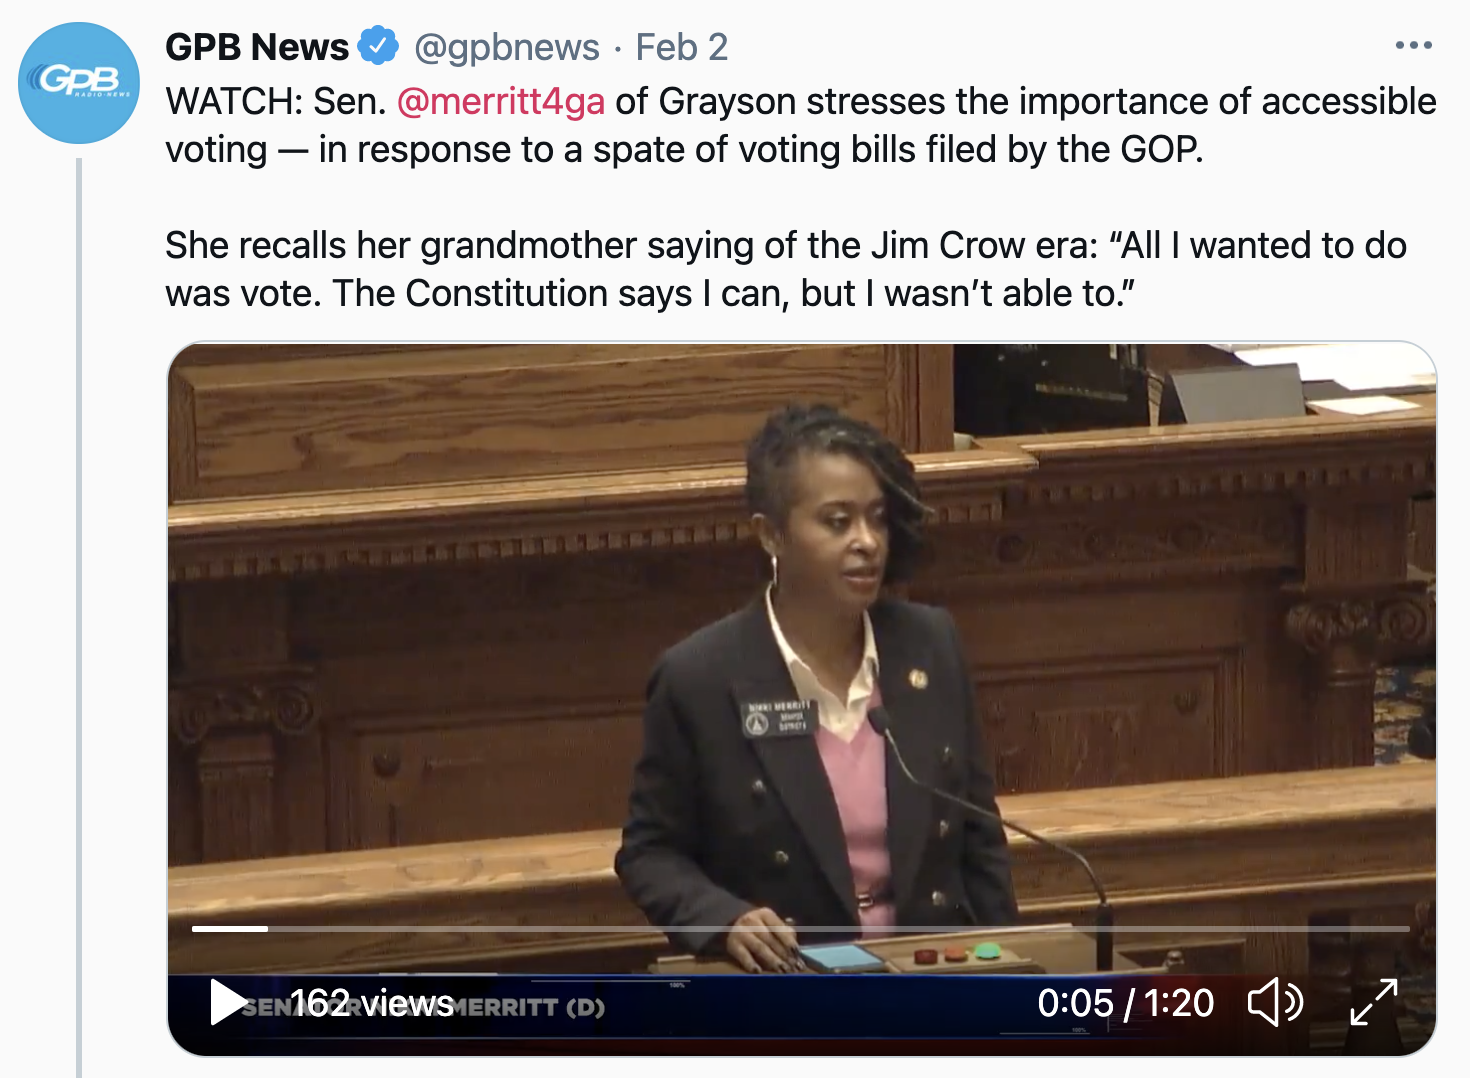 GPB News: WATCH: Sen. @merritt4ga of Grayson stresses the importance of accessible voting -- in response to a spate of voting bills filed by the GOP. She recalls her grandmother saying of the Jim Crow era: 